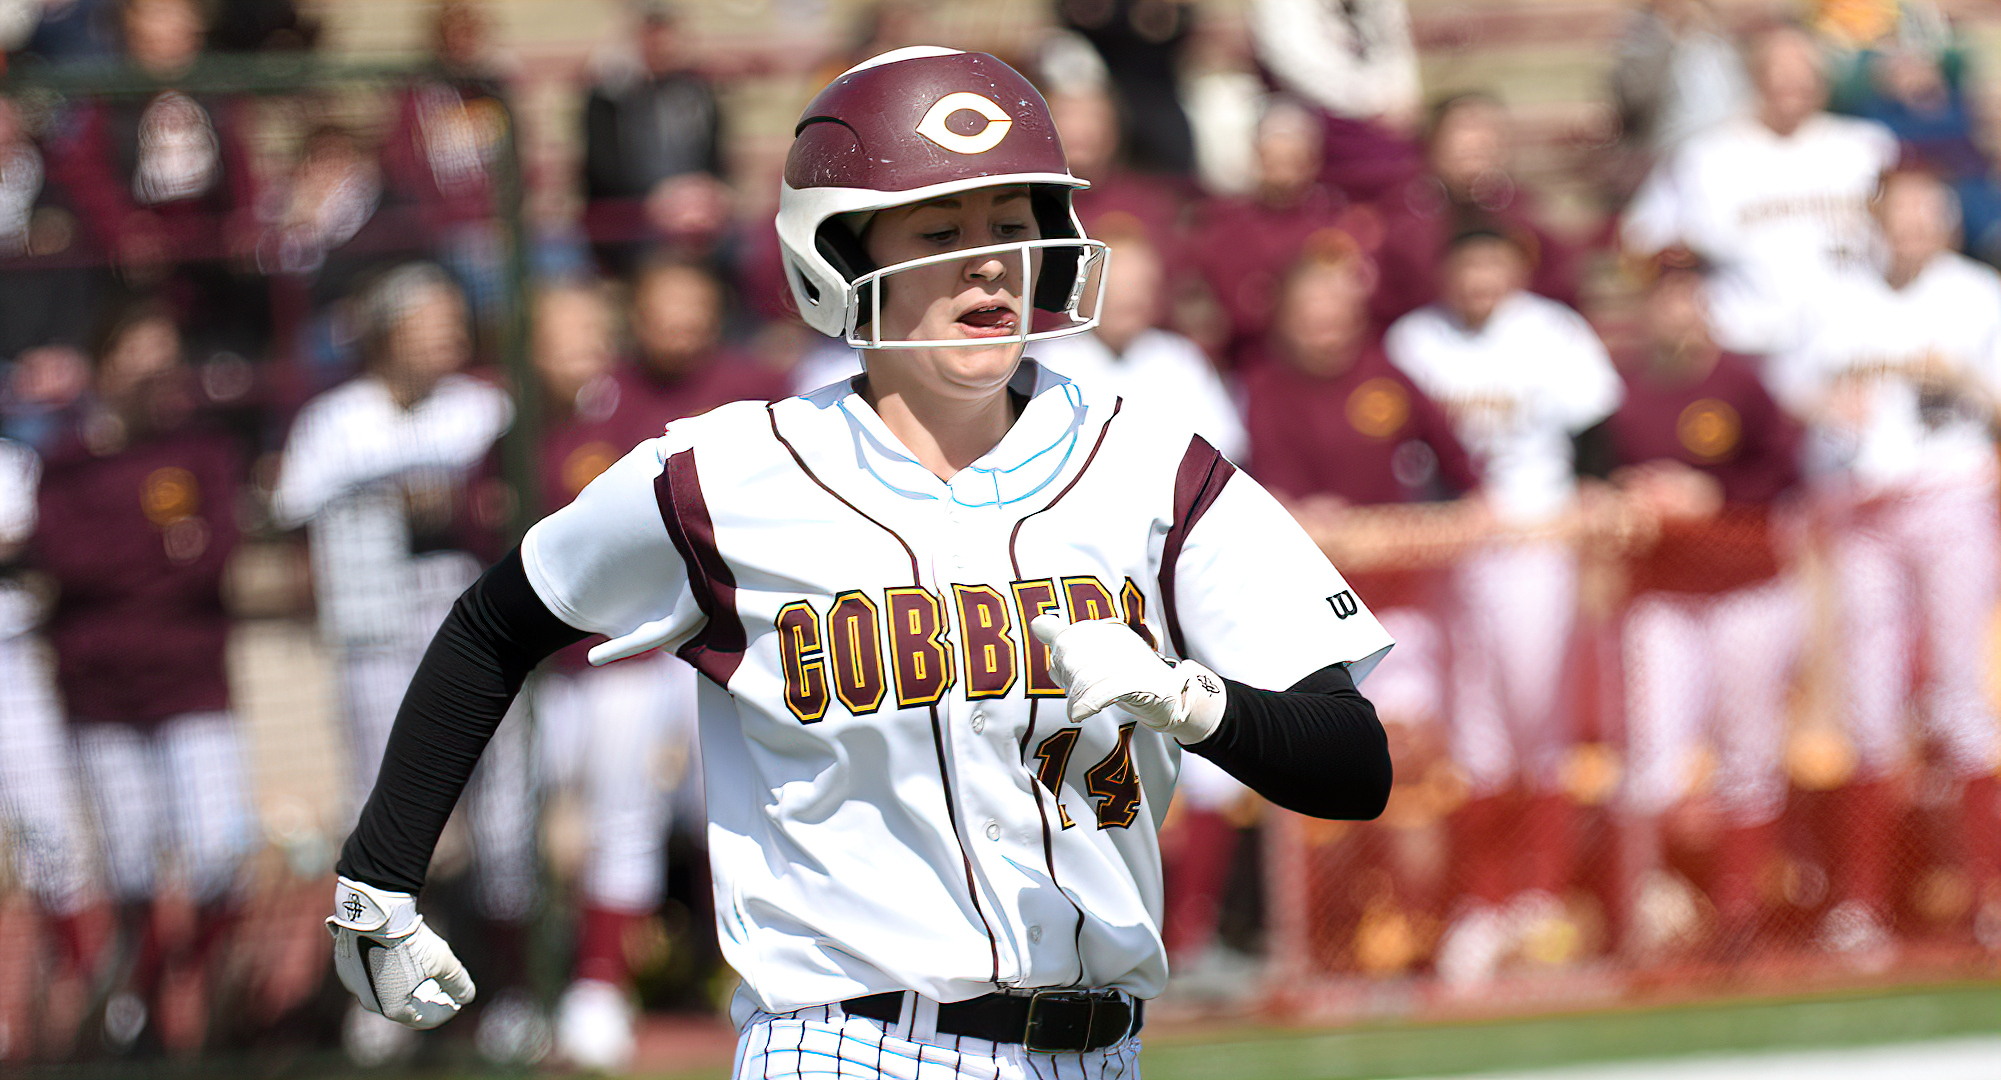 Kate Wensloff had a pair of multiple-hit game on the Cobbers' final day in Florida. She went 5-for-7 and leads the team in hitting with a .414 average.